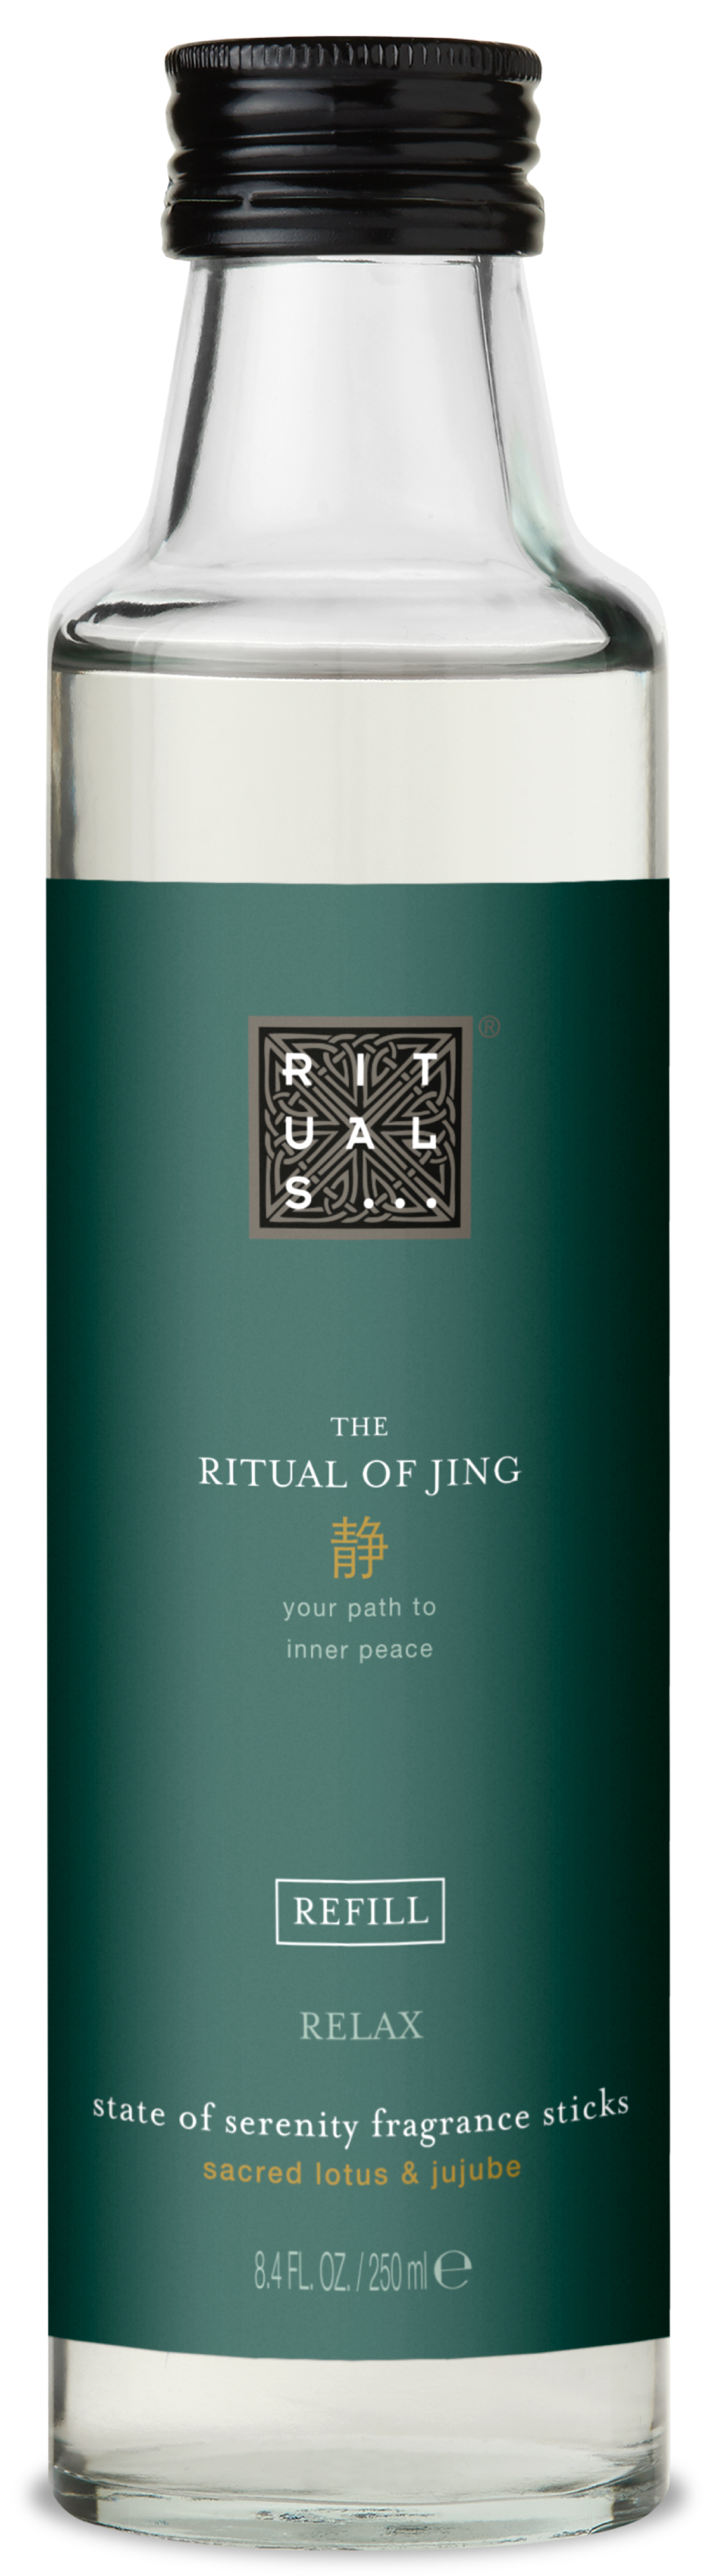 Rituals The Ritual of Jing Home Fragrance Refill for Fragrance